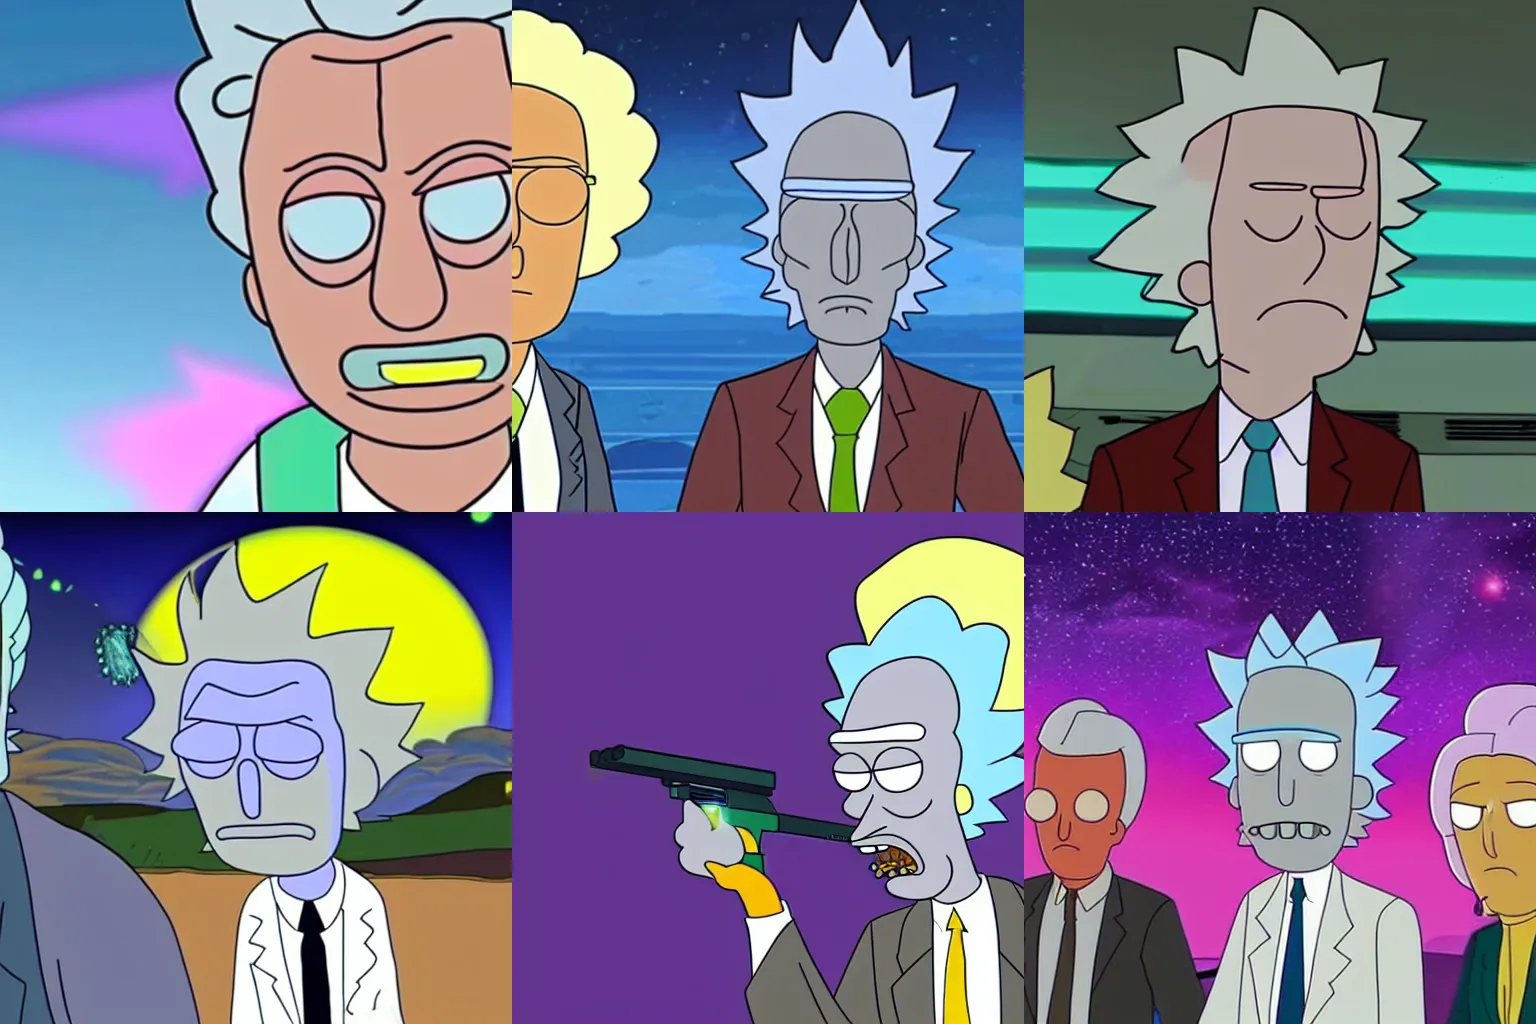 Prompt: geert wilders as a rick & morty character shooting lasers at women wearing headscarves